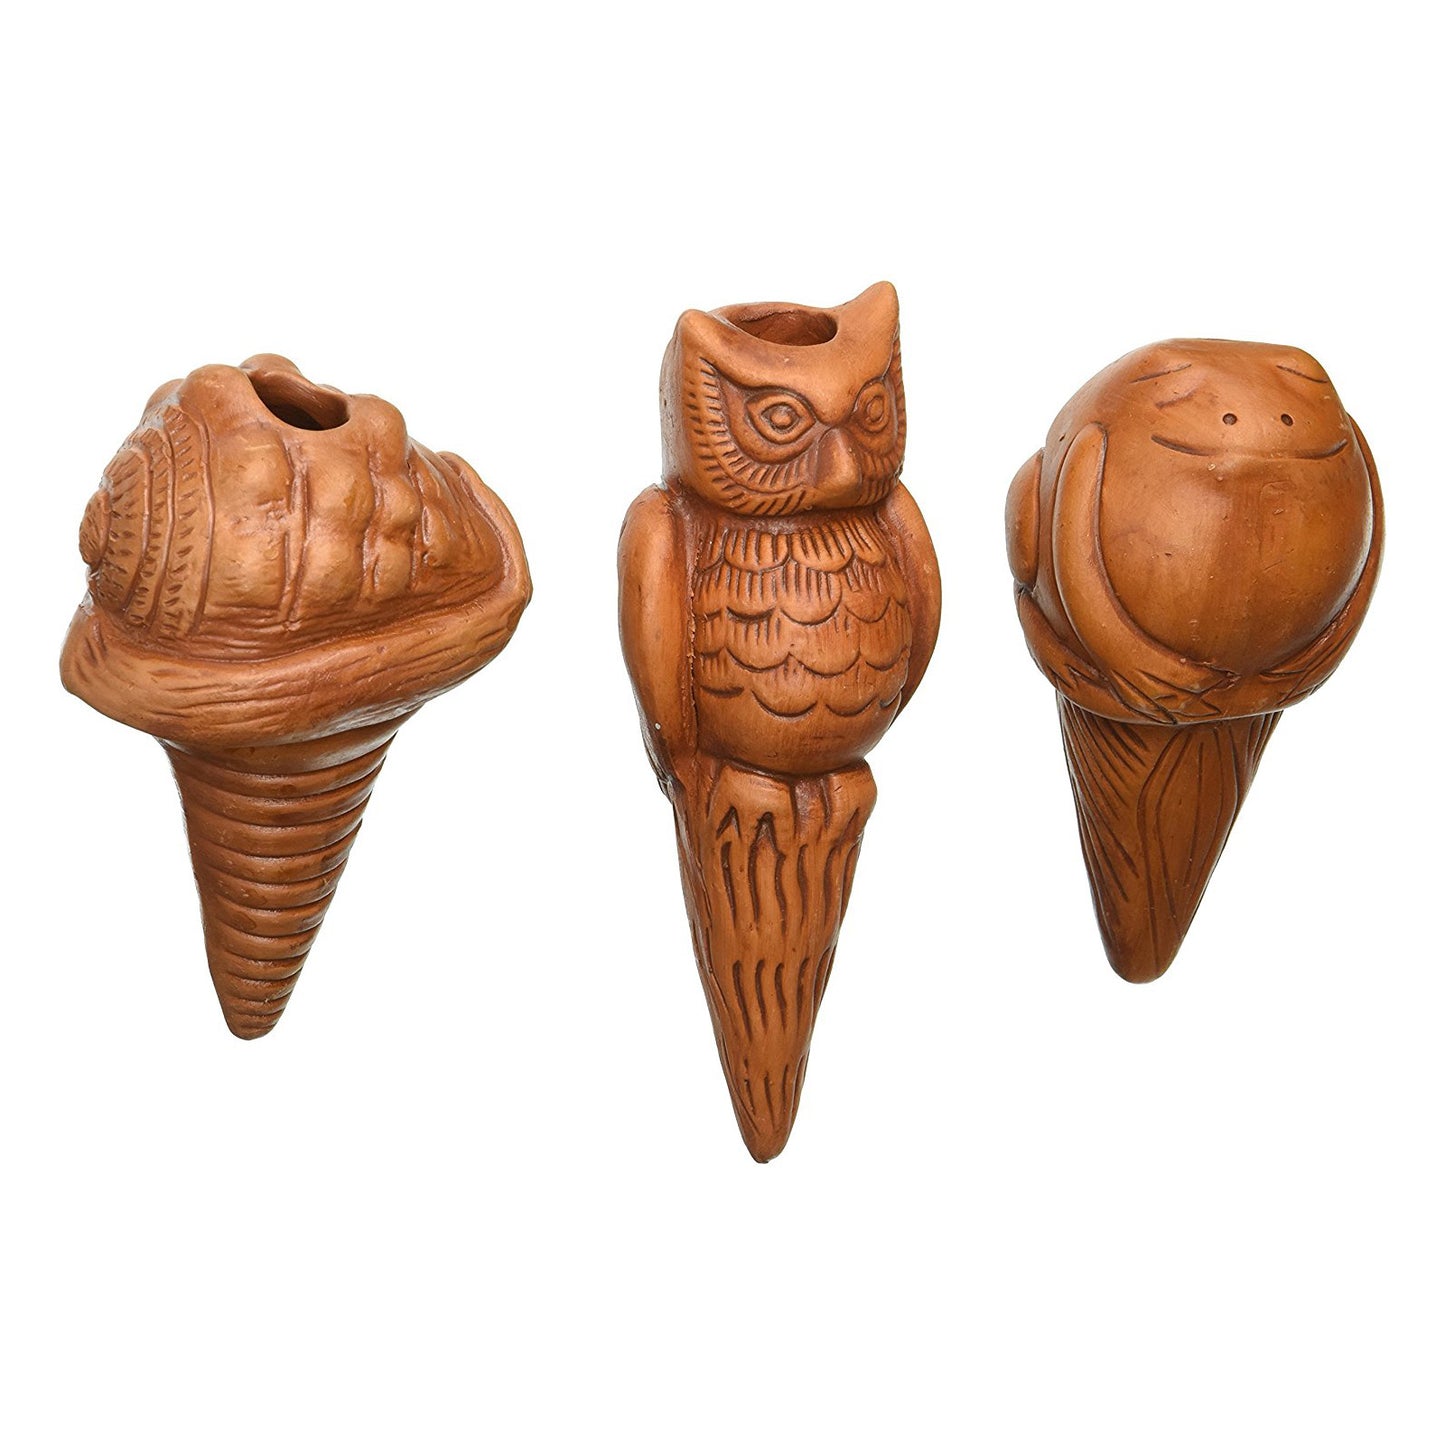 Fire Sale! Terracotta Potted Plant Watering Stakes Frog Shell Owl w Small Lotus Rain Gauge